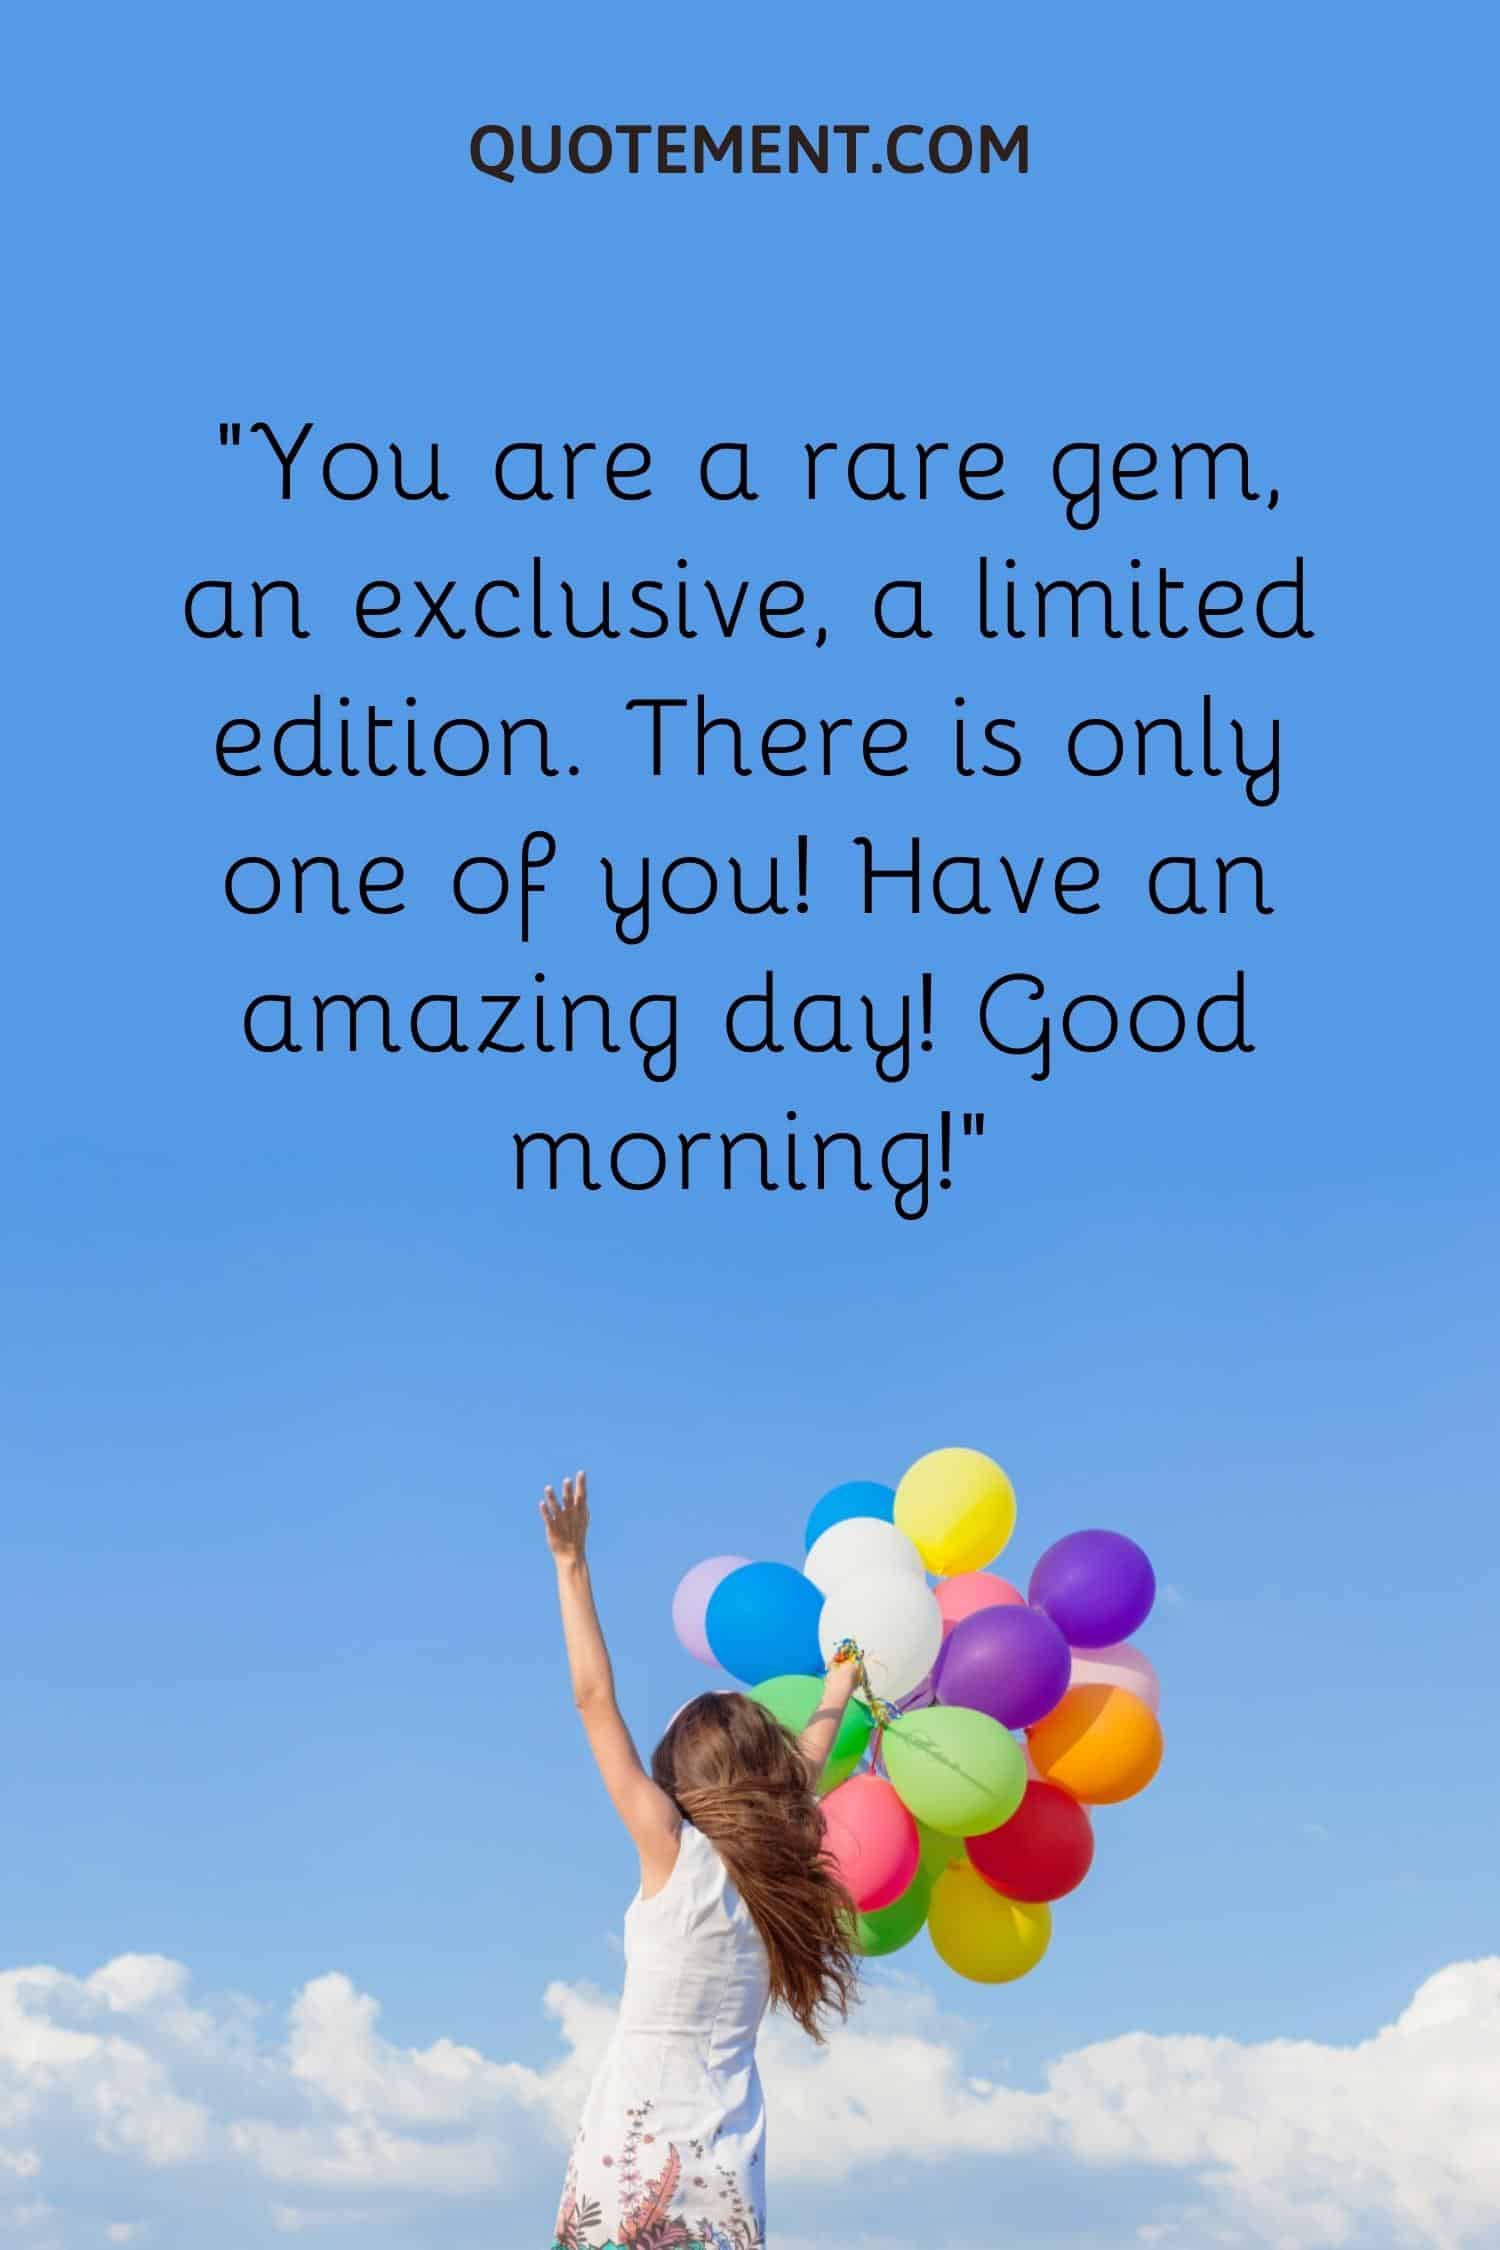 You are a rare gem, an exclusive, a limited edition